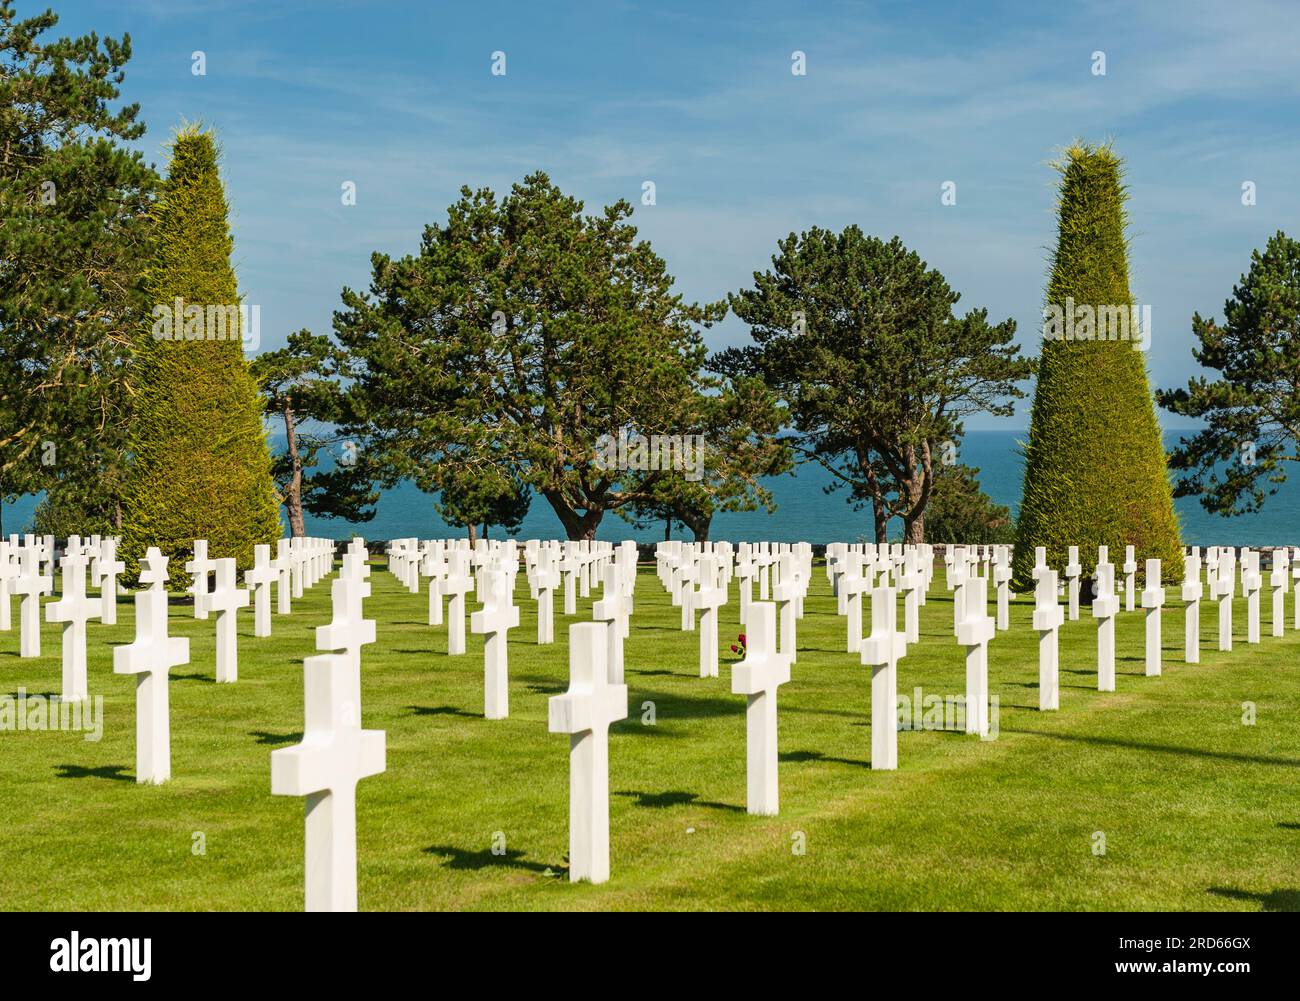 Normandy American Cemetery and Memorial at Colleville-sur-Mer in France. Stock Photo